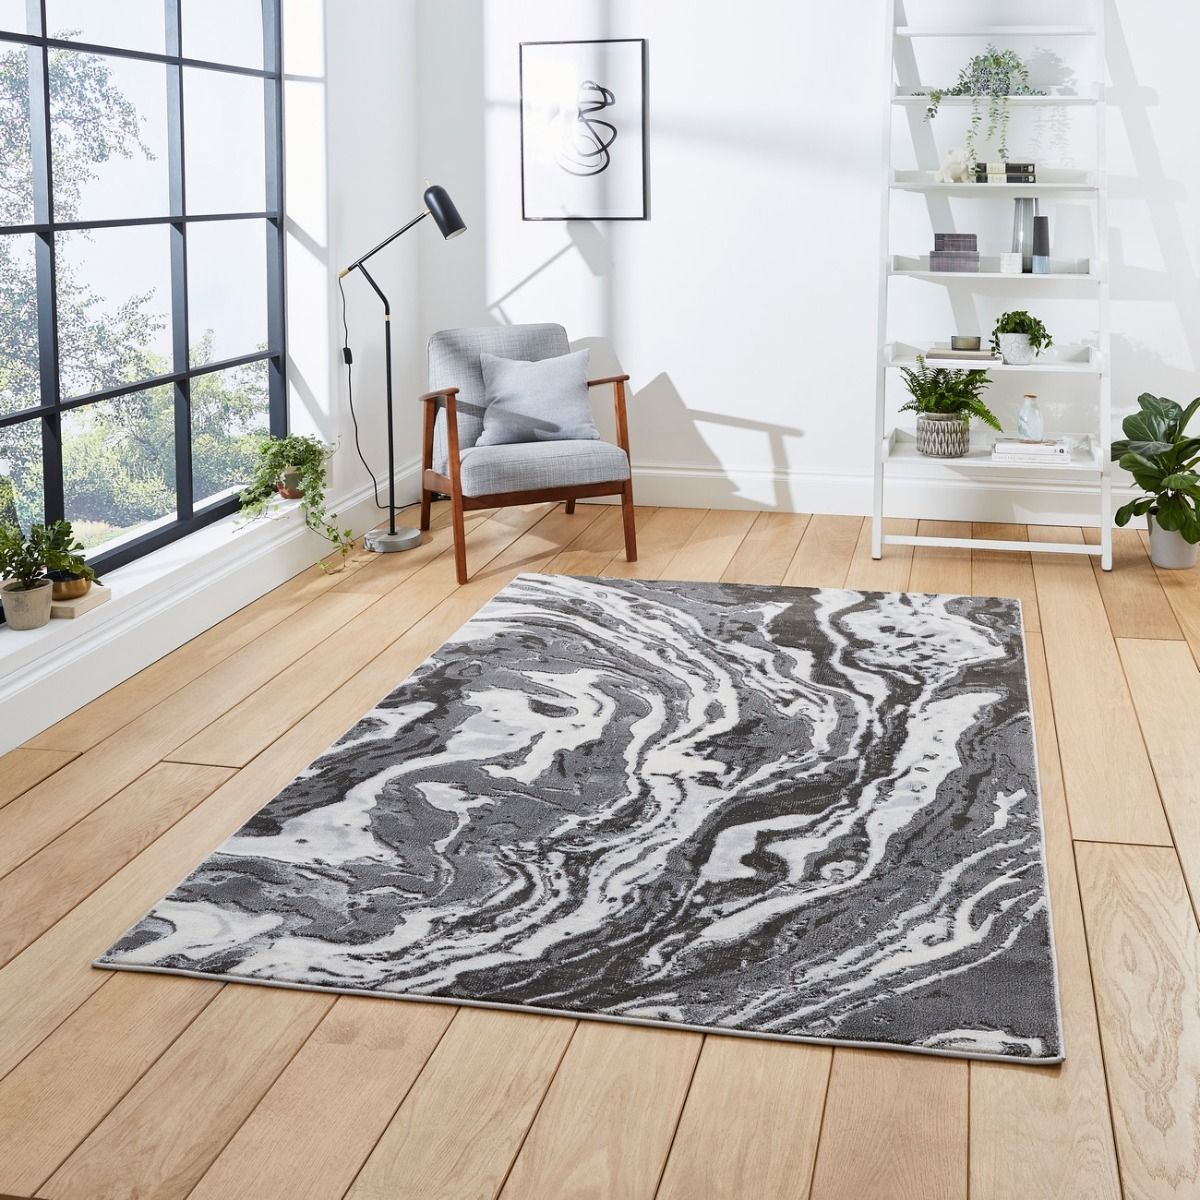 Shop Online Apollo Gr584 Grey Abstract Rug – Therugshopuk With Regard To Apollo Rugs (View 5 of 15)